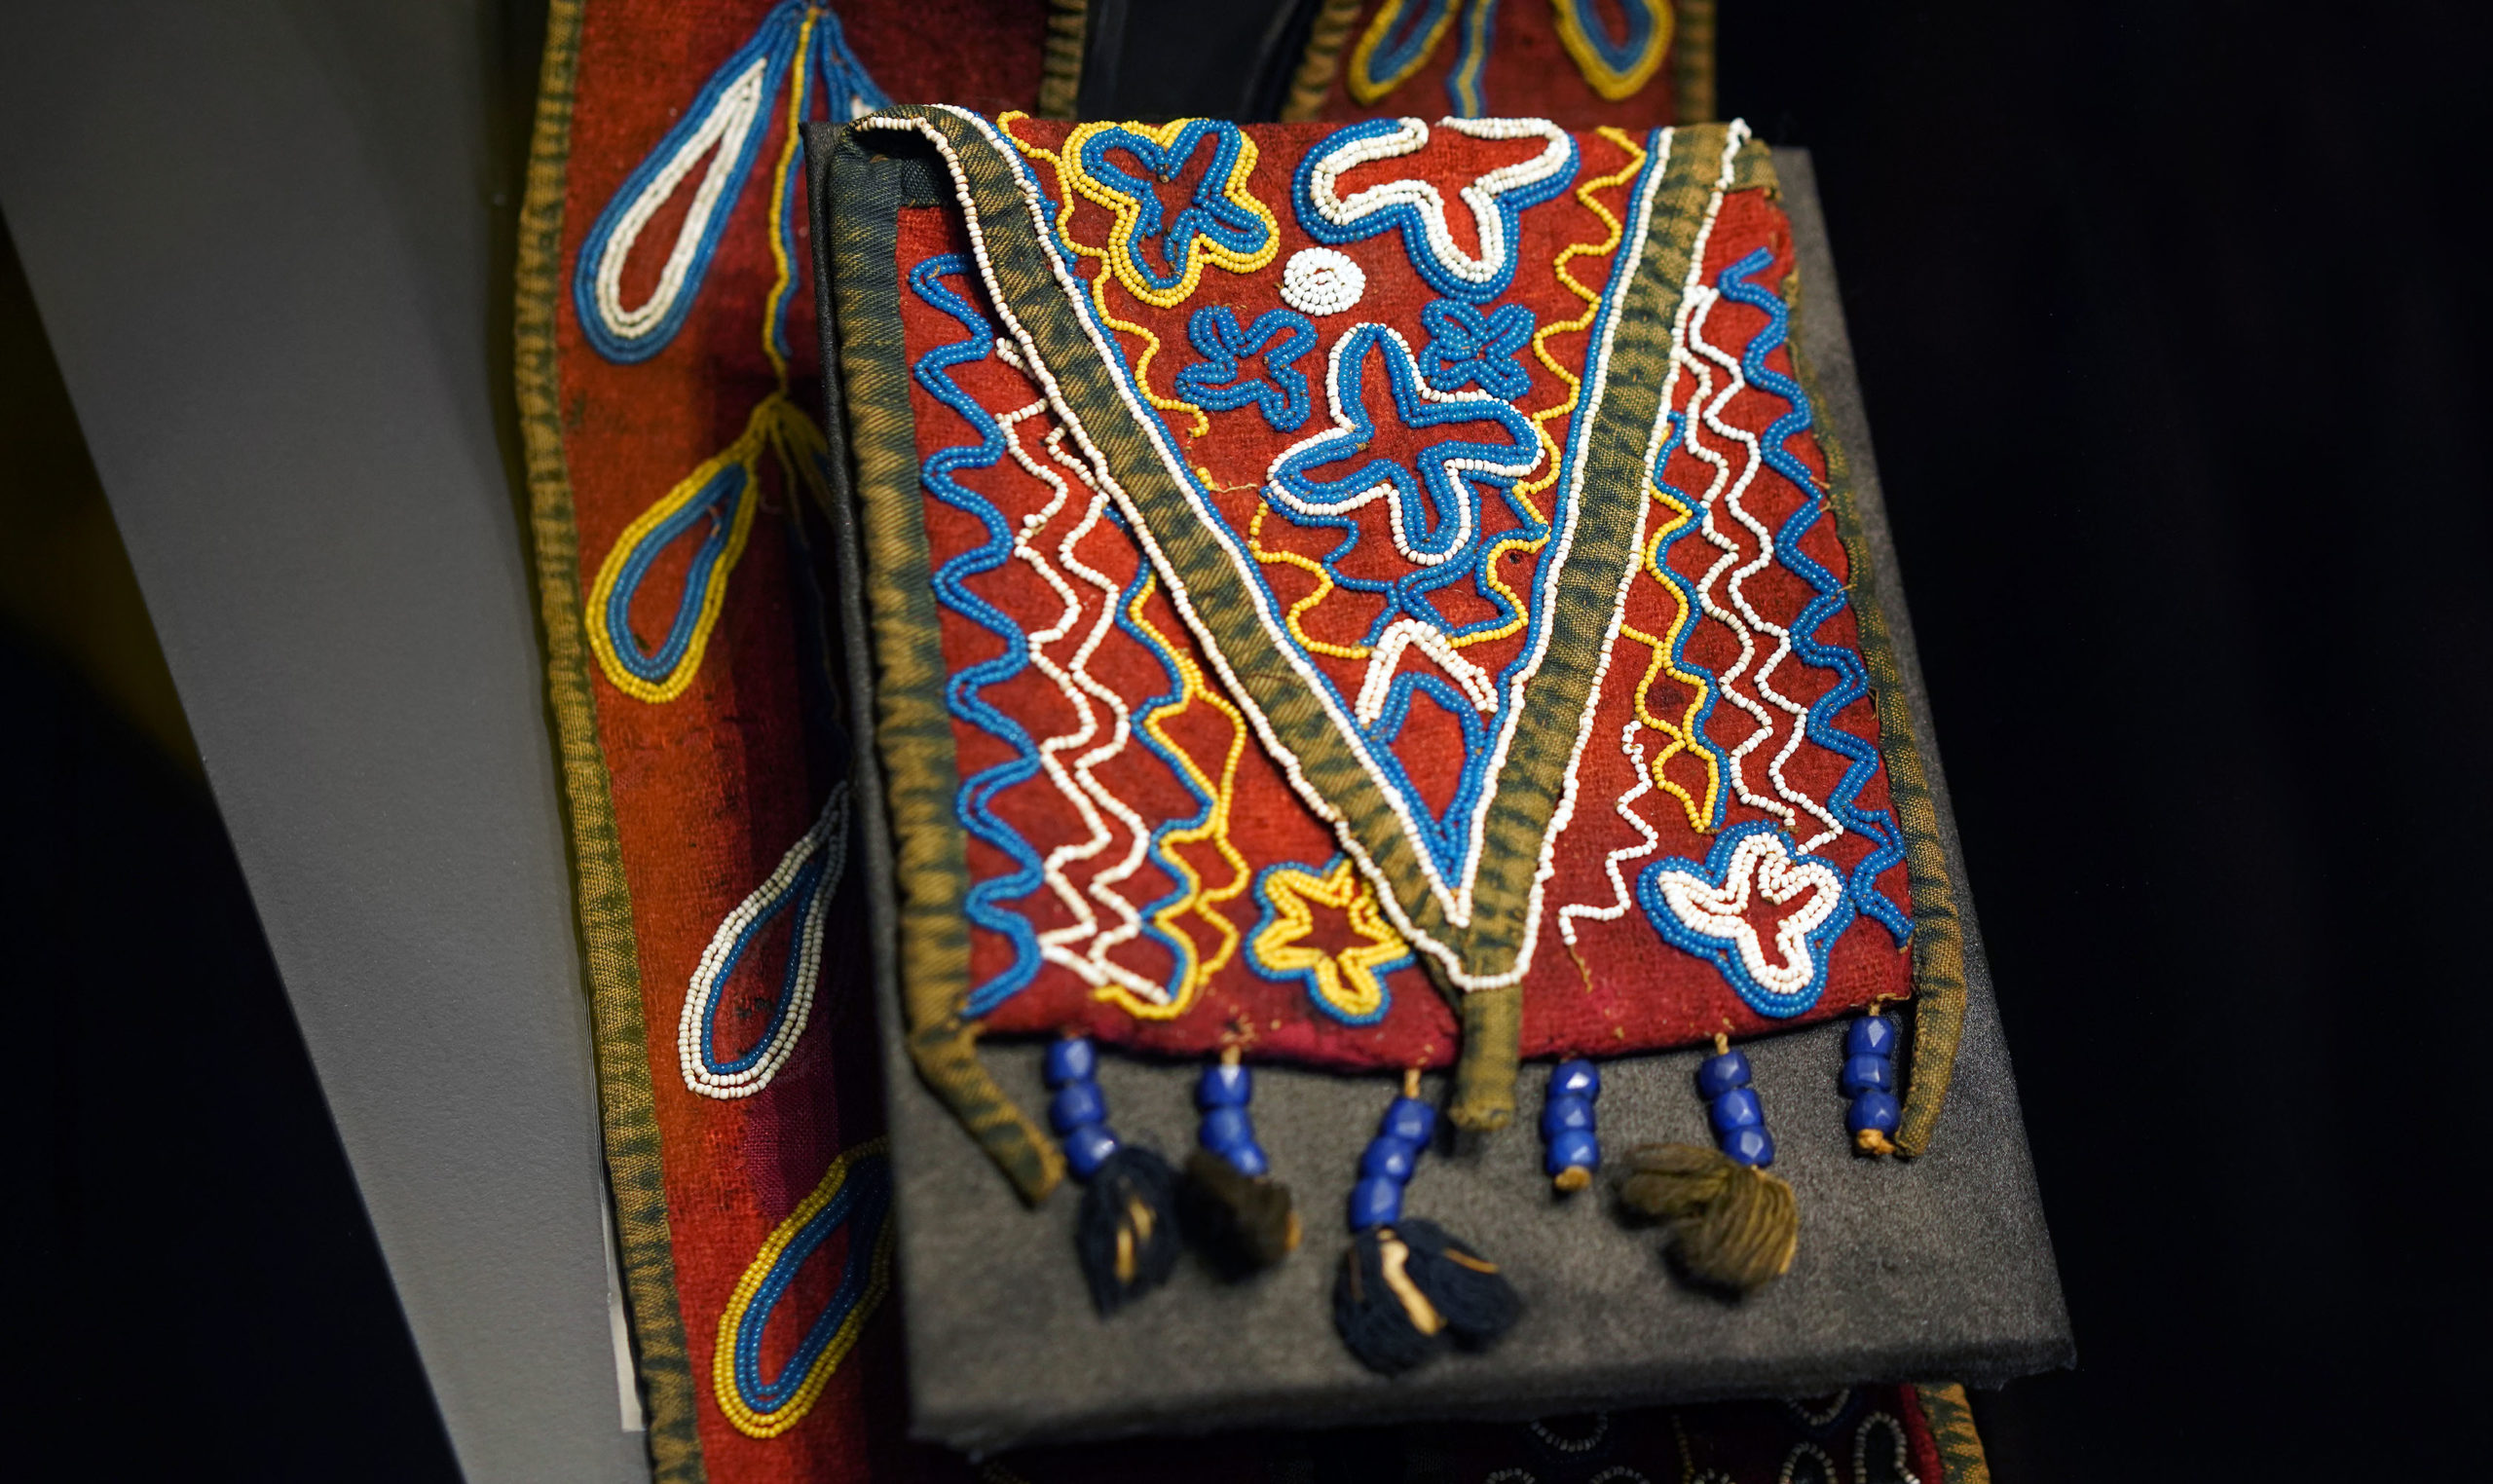 Bandolier bag, likely Delaware, wool, glass beads, cotton, fringe c. 1860 (The American Civil War Museum, photo: Steven Zucker, CC BY-NC-SA 2.0))